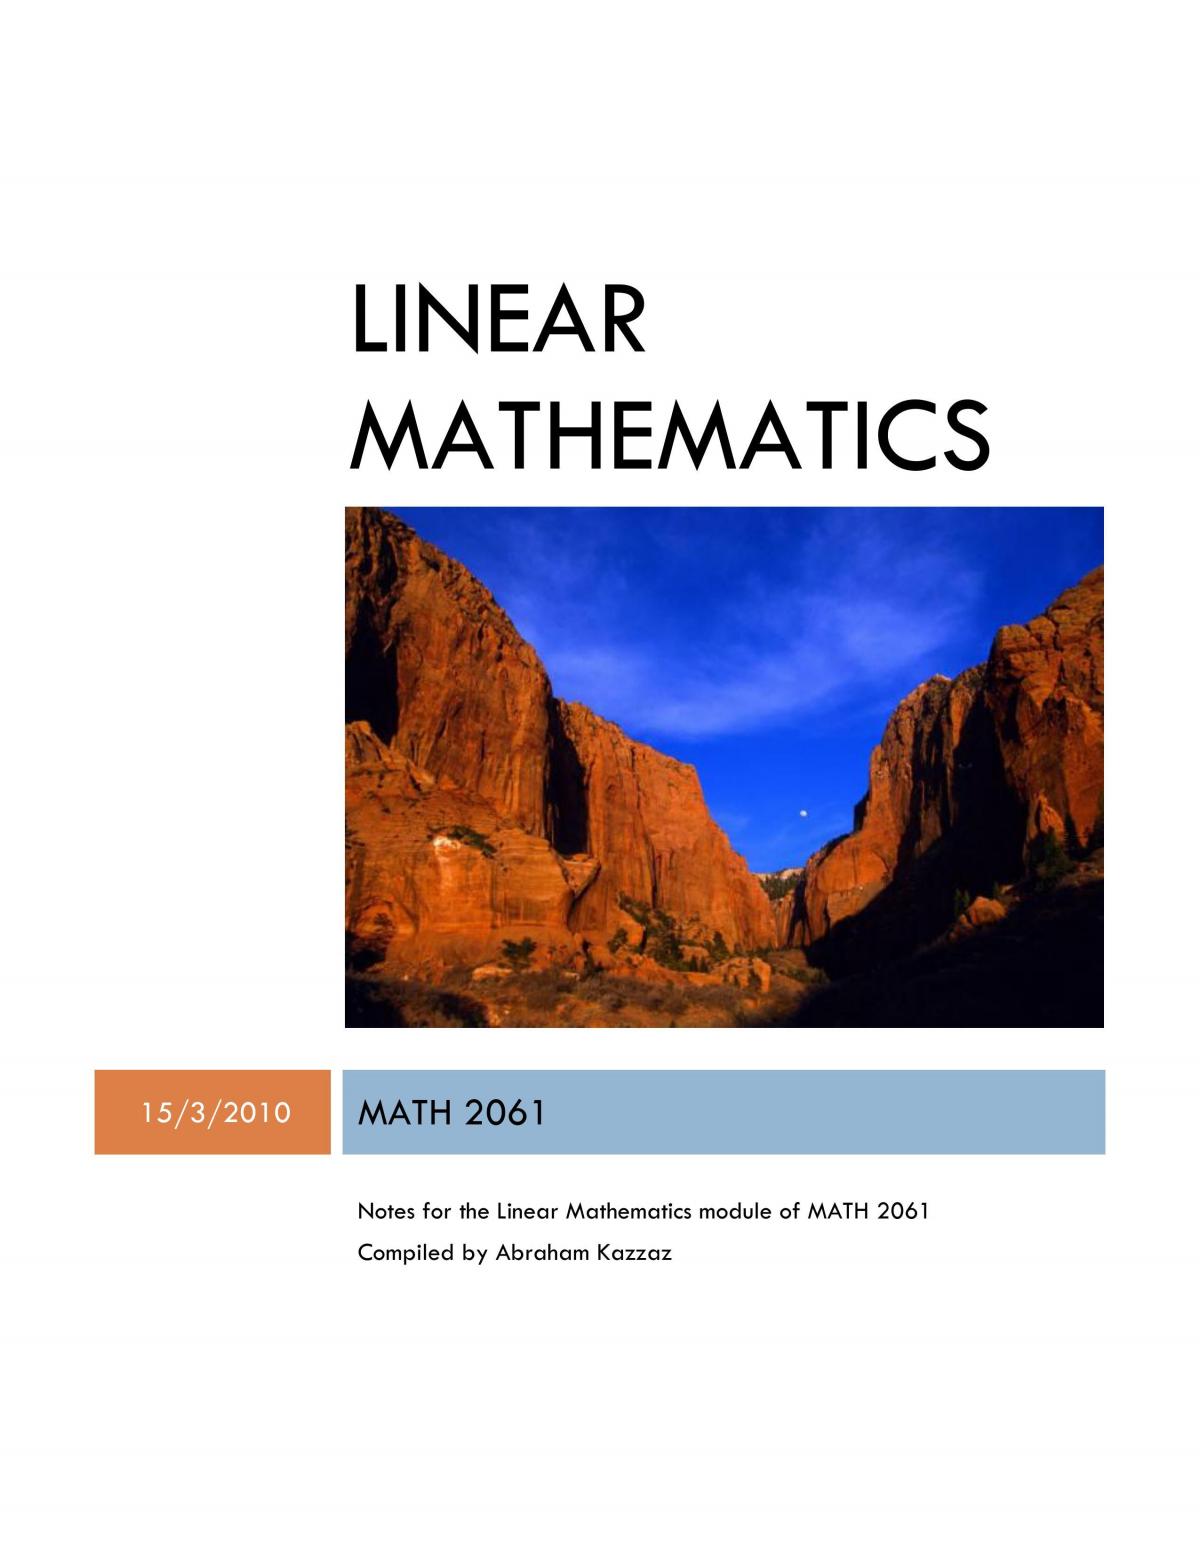 Notes for the Linear Mathematics module of MATH 2061 - Page 1